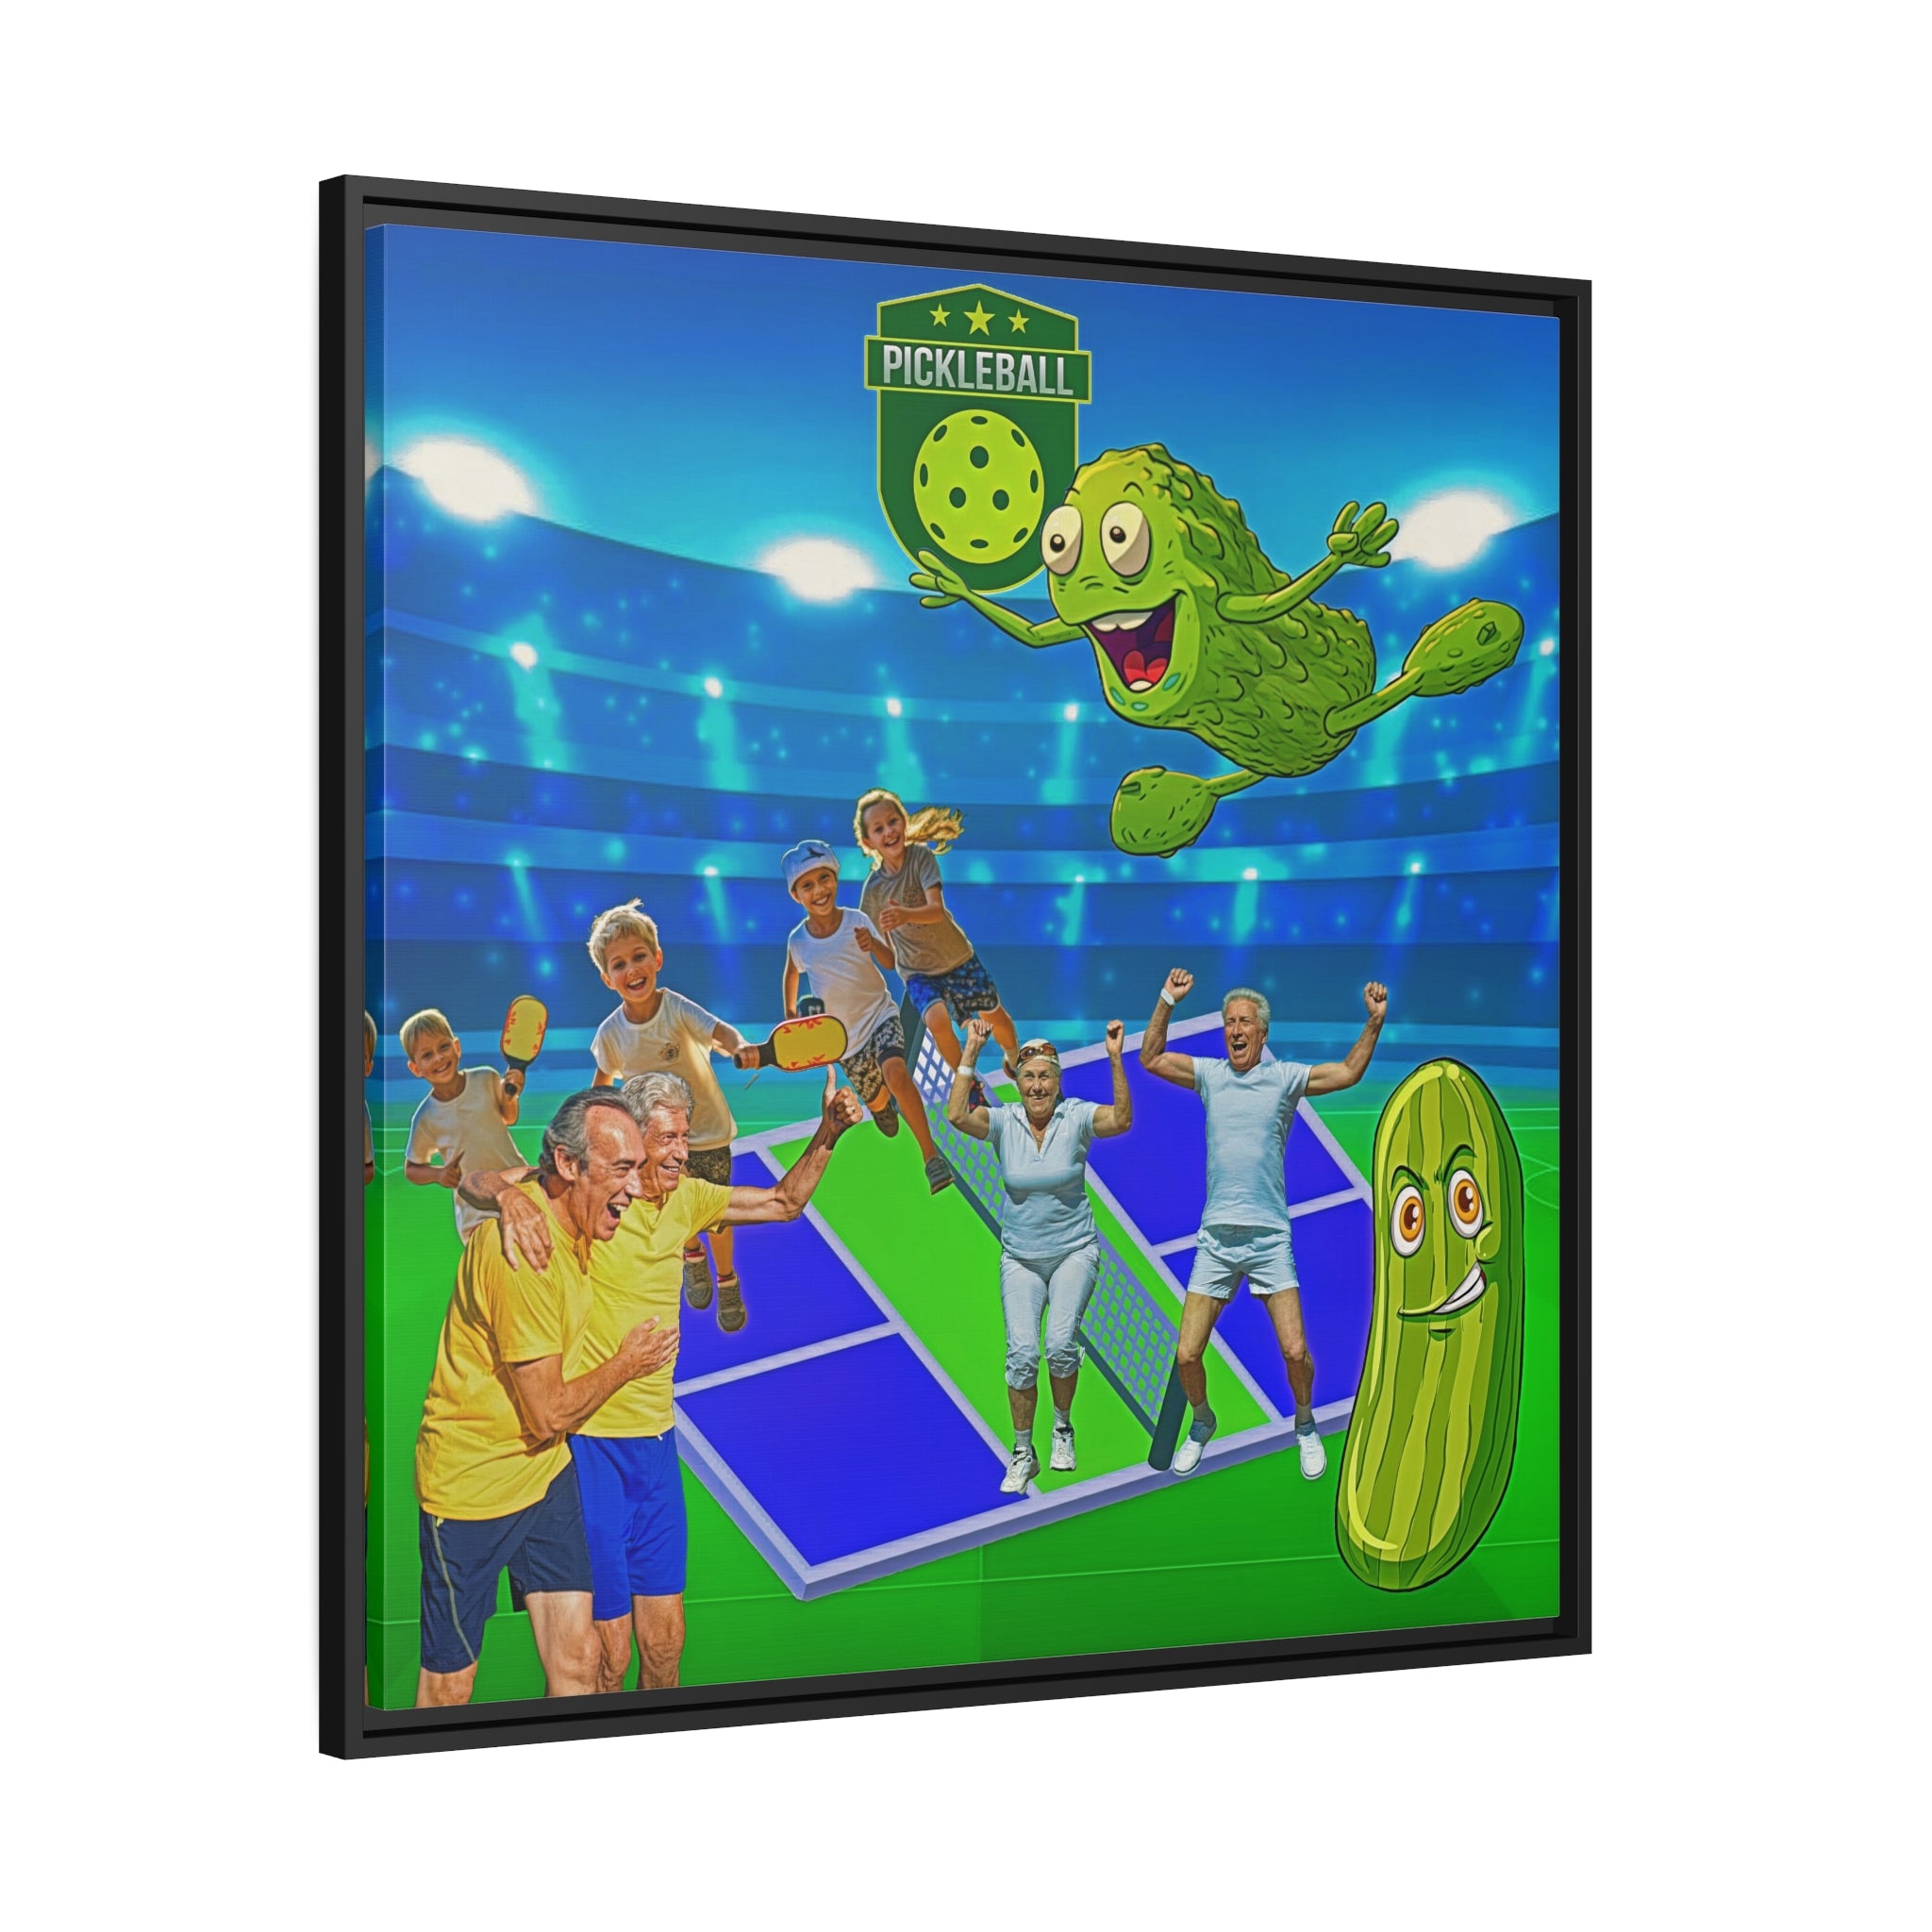 Wall Art PICKLEBALL Sport Canvas Print Painting Original Giclee 32x32 + Frame Love Nice Beauty Fun Design Fit Hot House Home Office Gift Ready Hang Living